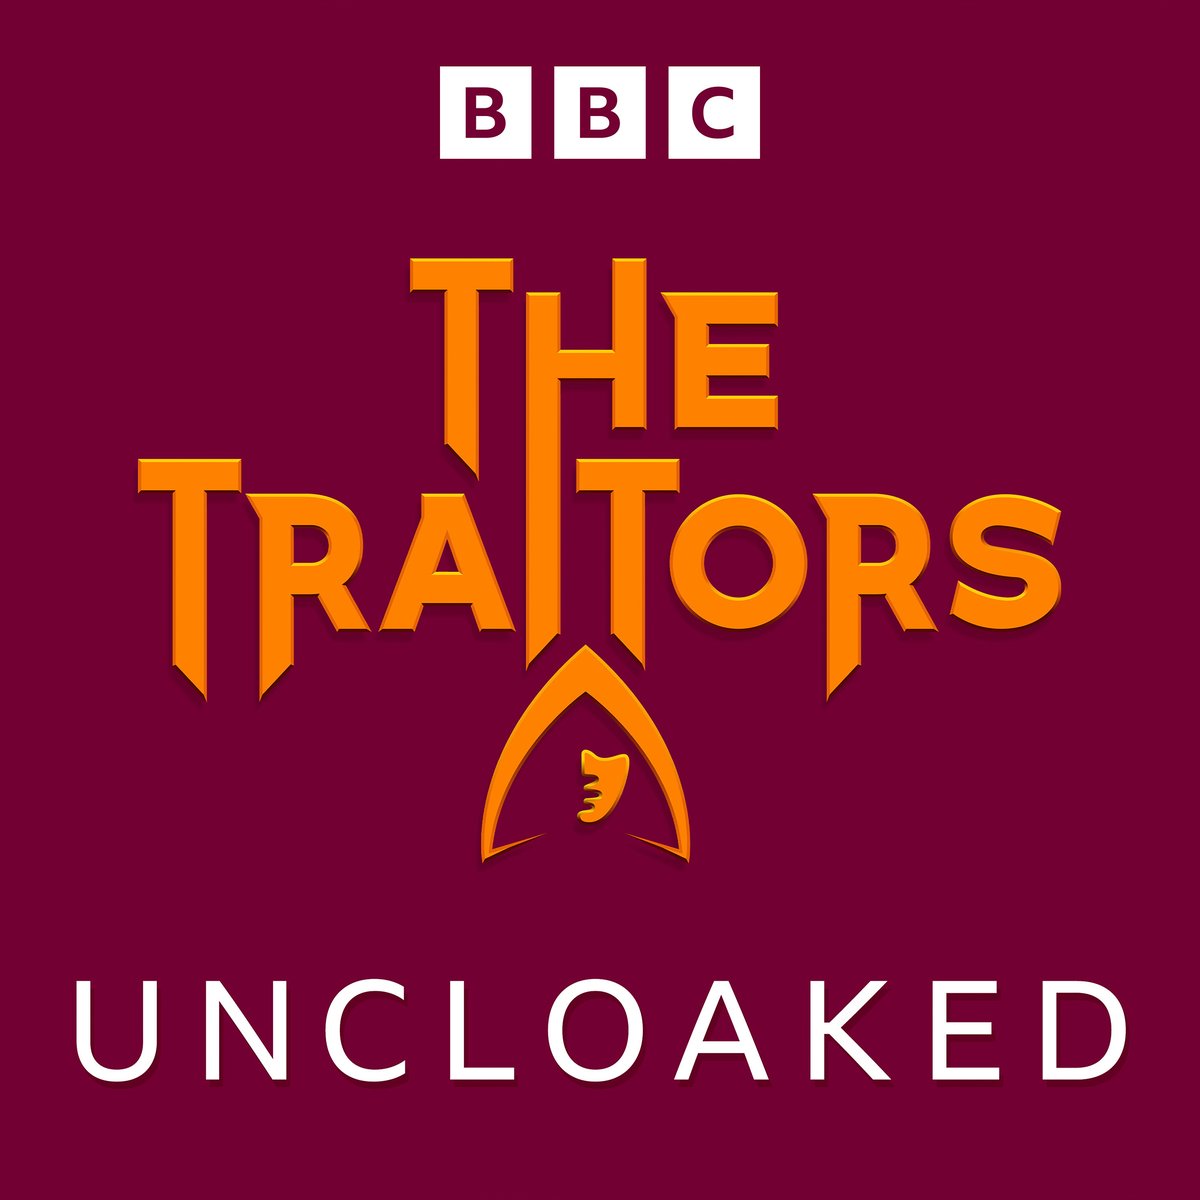 🏰 O come all ye Faithfuls... The Traitors: Uncloaked is coming to the BBC! Join Ed Gamble and guests for all the best analysis and reaction to the latest betrayals, mind games and manipulations in the new visualised podcast Learn more ➡️ bbc.in/4a3XtNq